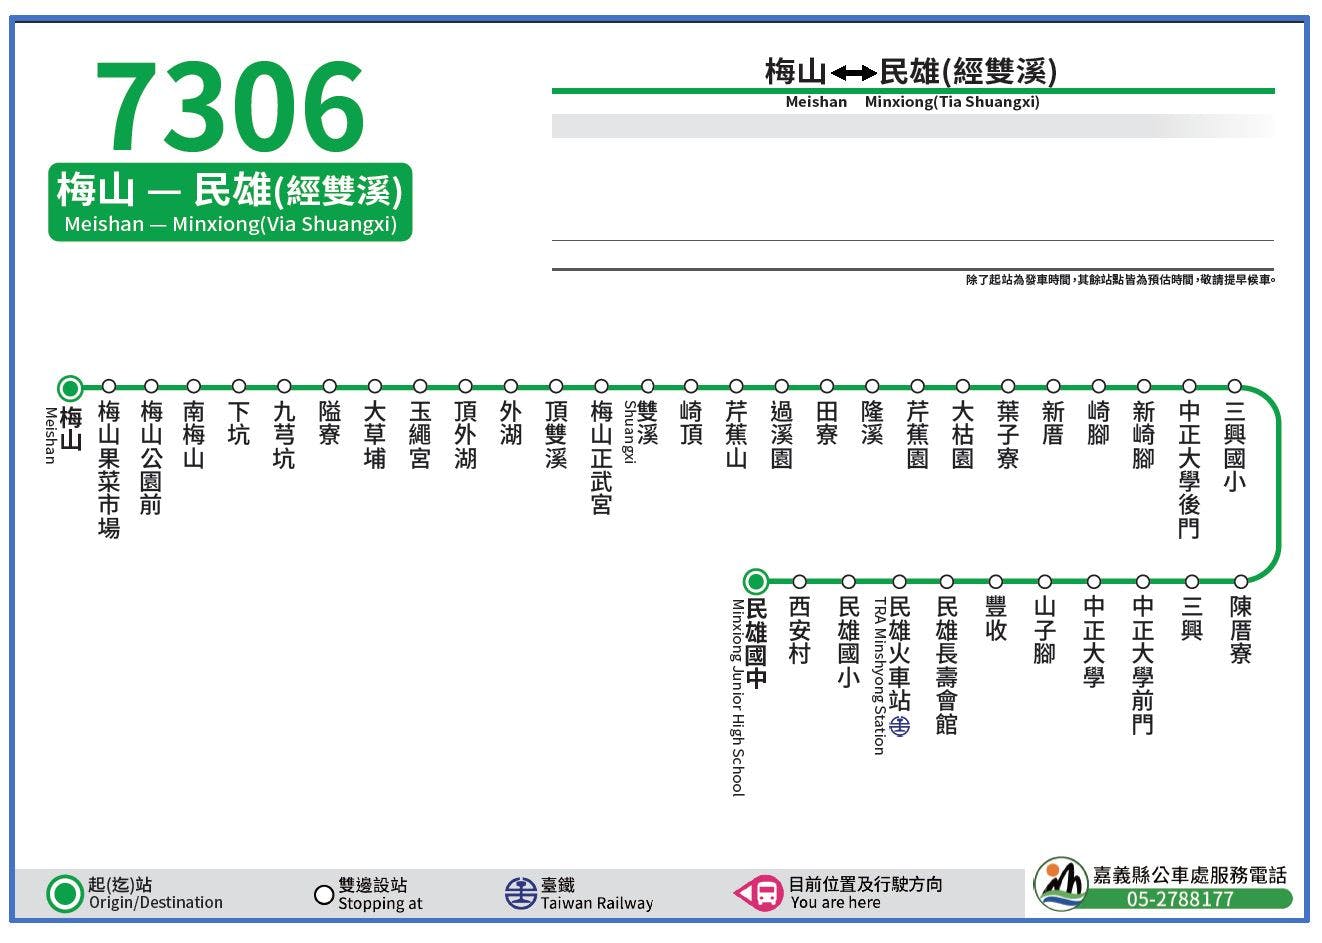 7306Route Map-Chiayi County Bus Service Administration